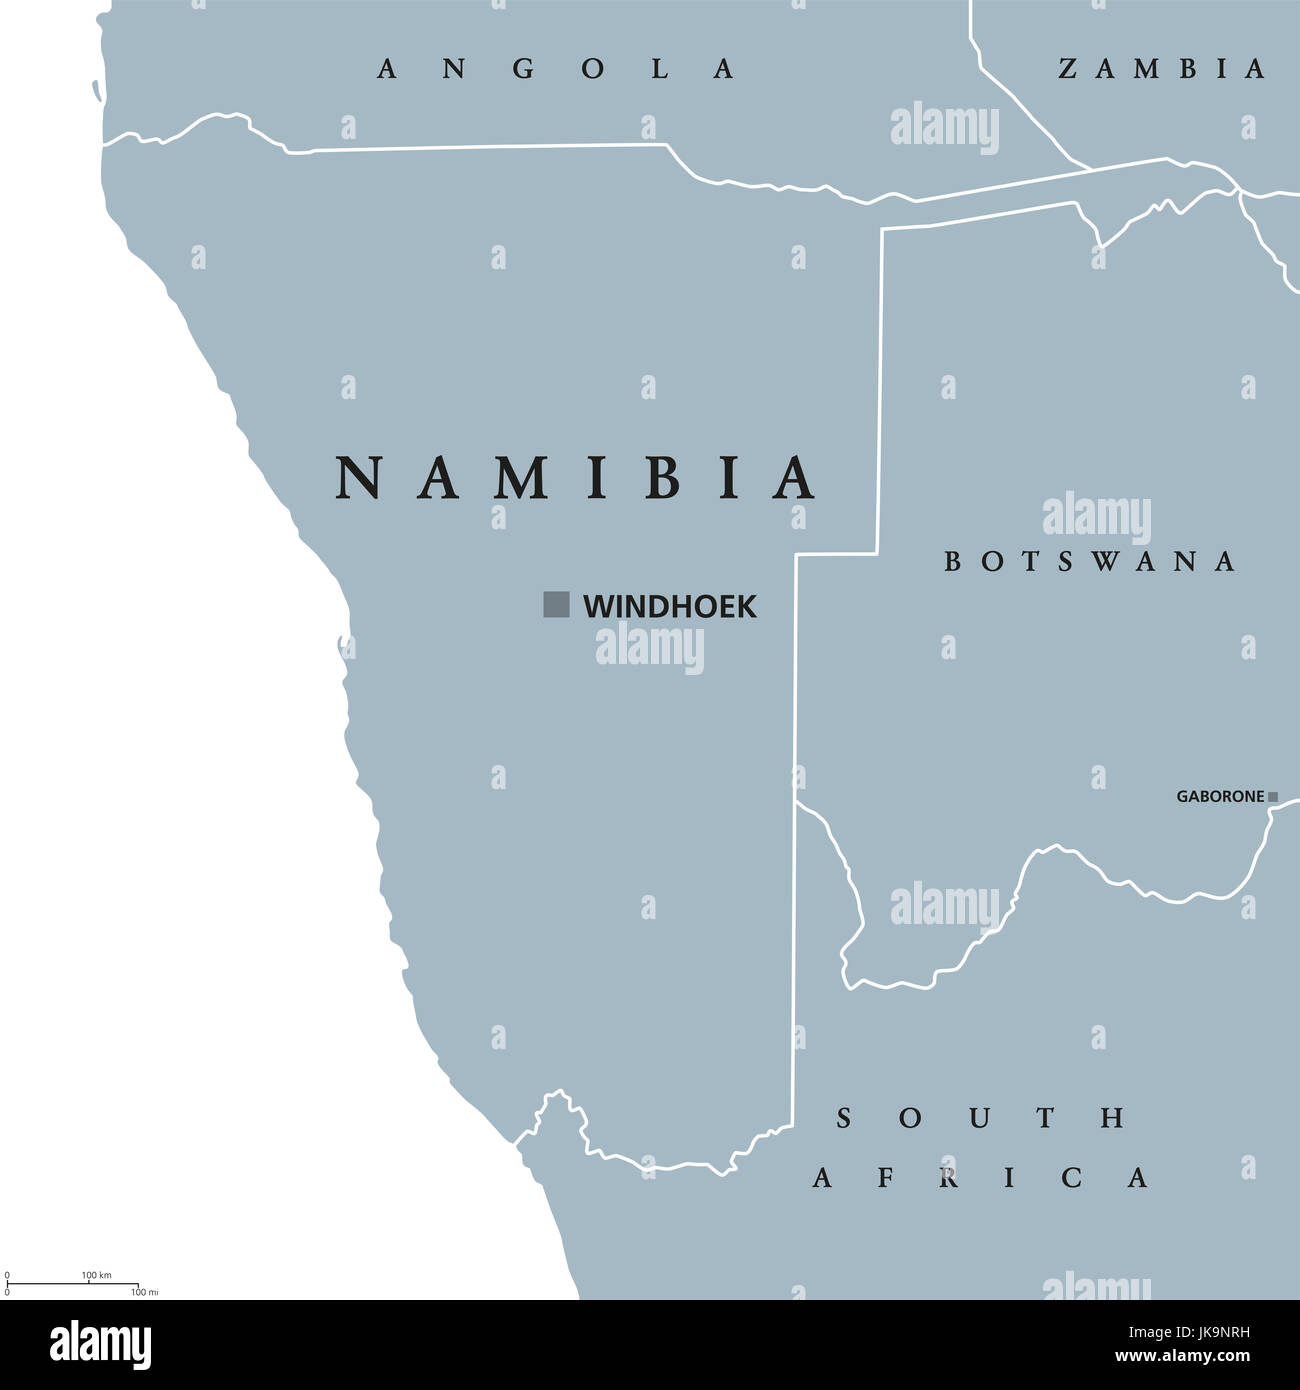 Namibia political map with capital Windhoek. Republic and country in Southern Africa on Atlantic Ocean. Former German South-West Africa. Illustration. Stock Photo